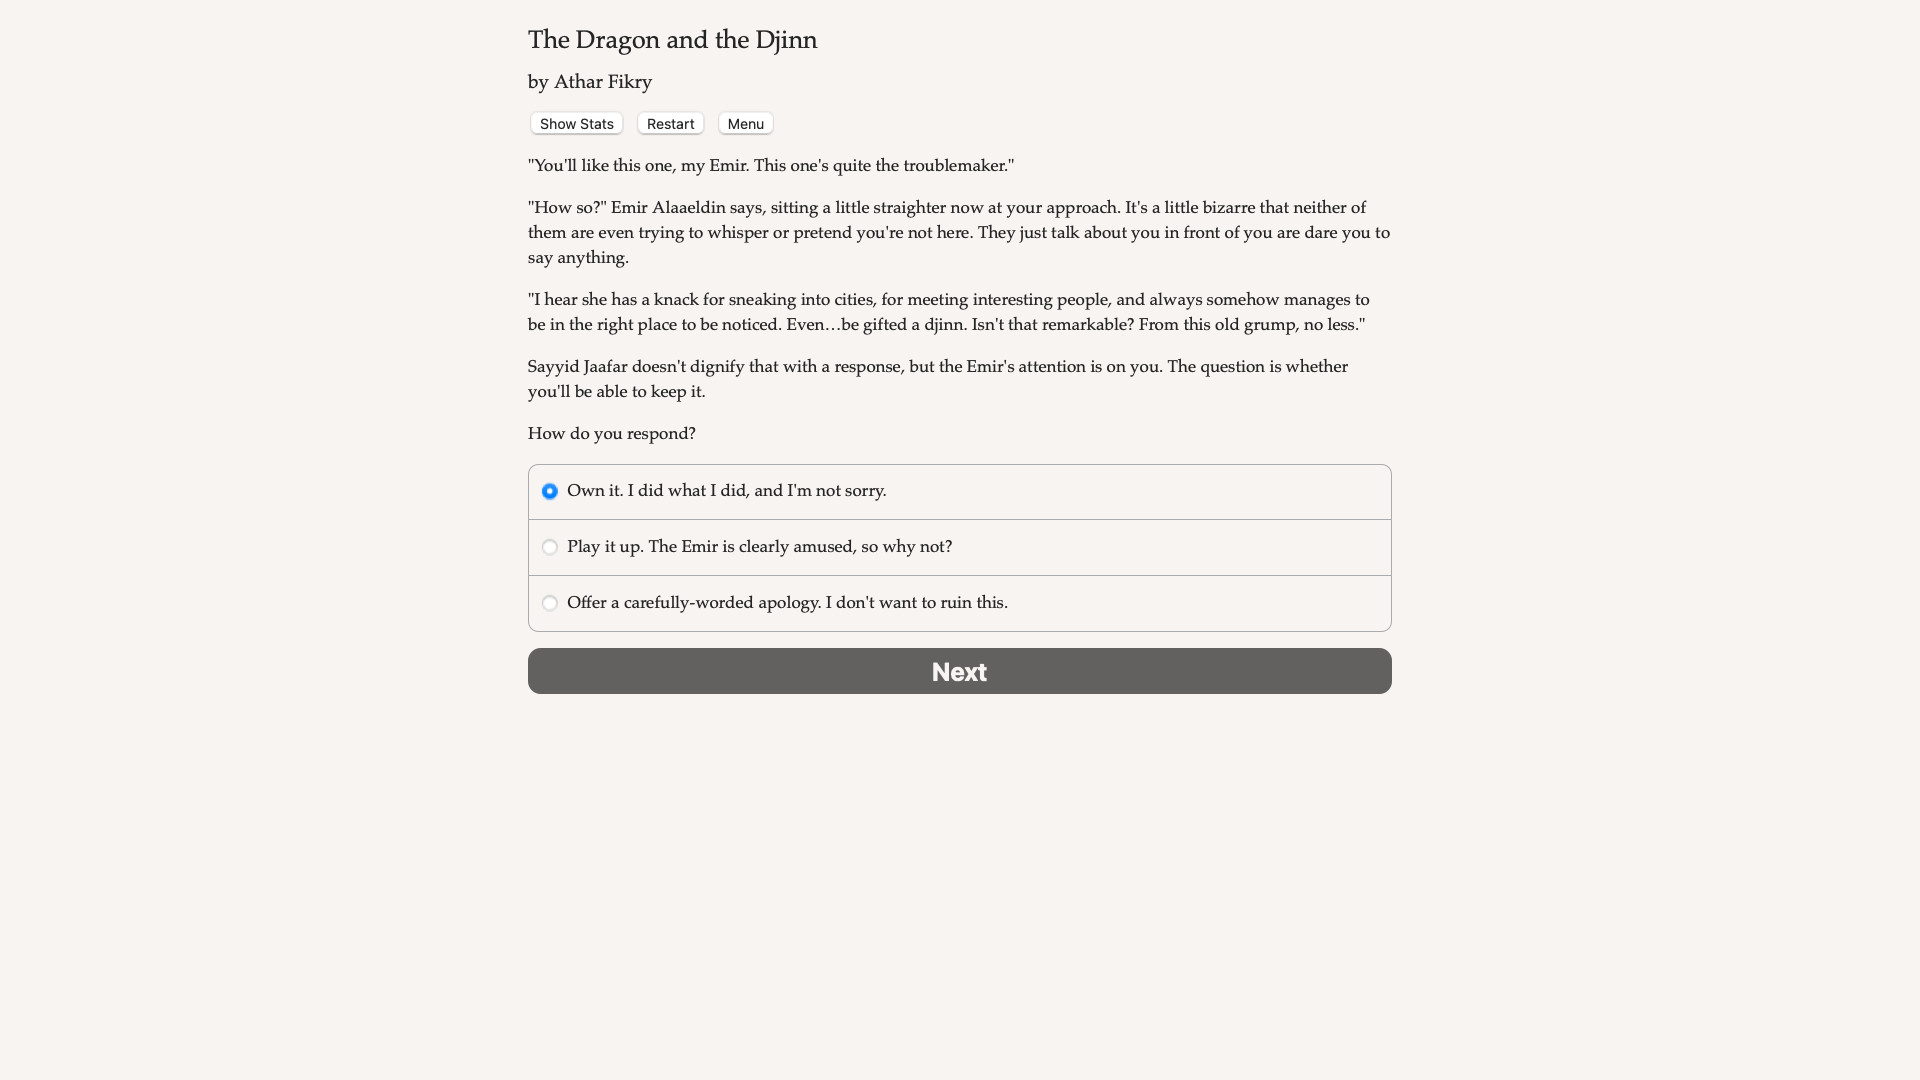 The Dragon and the Djinn Free Download